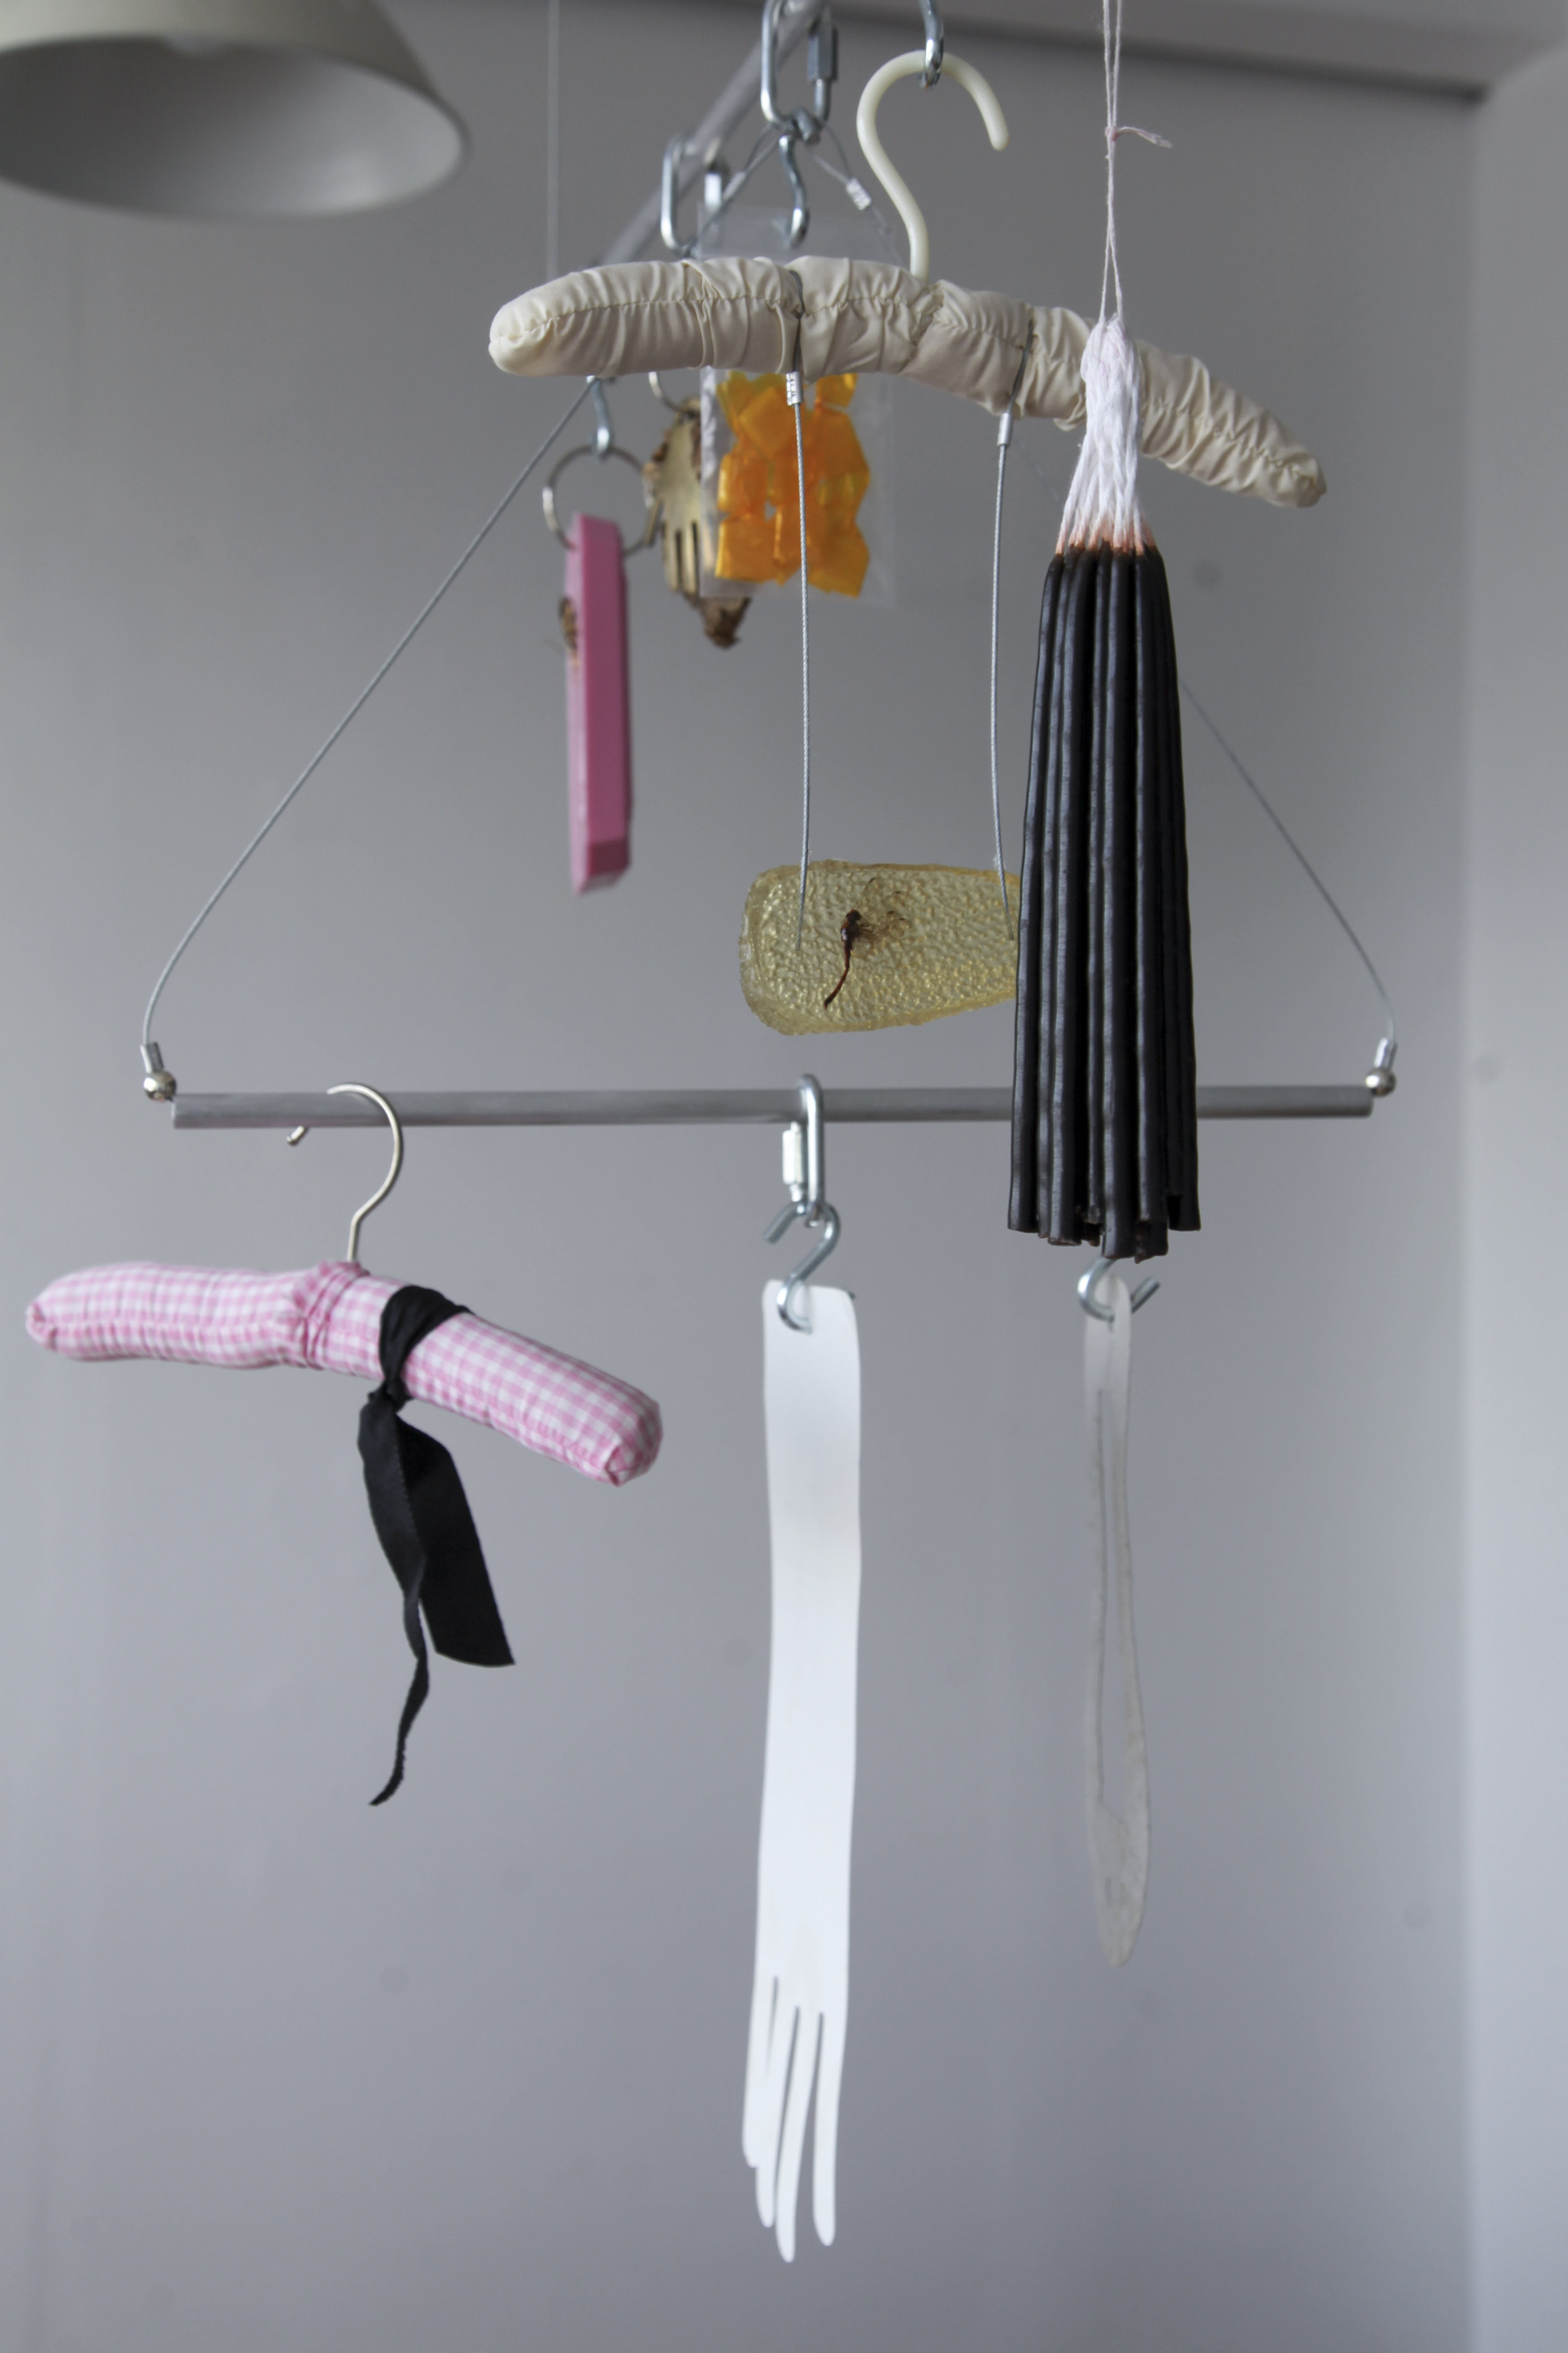   Mobile , Nadia Gohar, silicone mould, butterfly, sunflower, horse brass, gum arabic, dragonfly in cast resin, candles, clothing hangers, ribbon, found paper, steel rod, and wire rope, 2017 